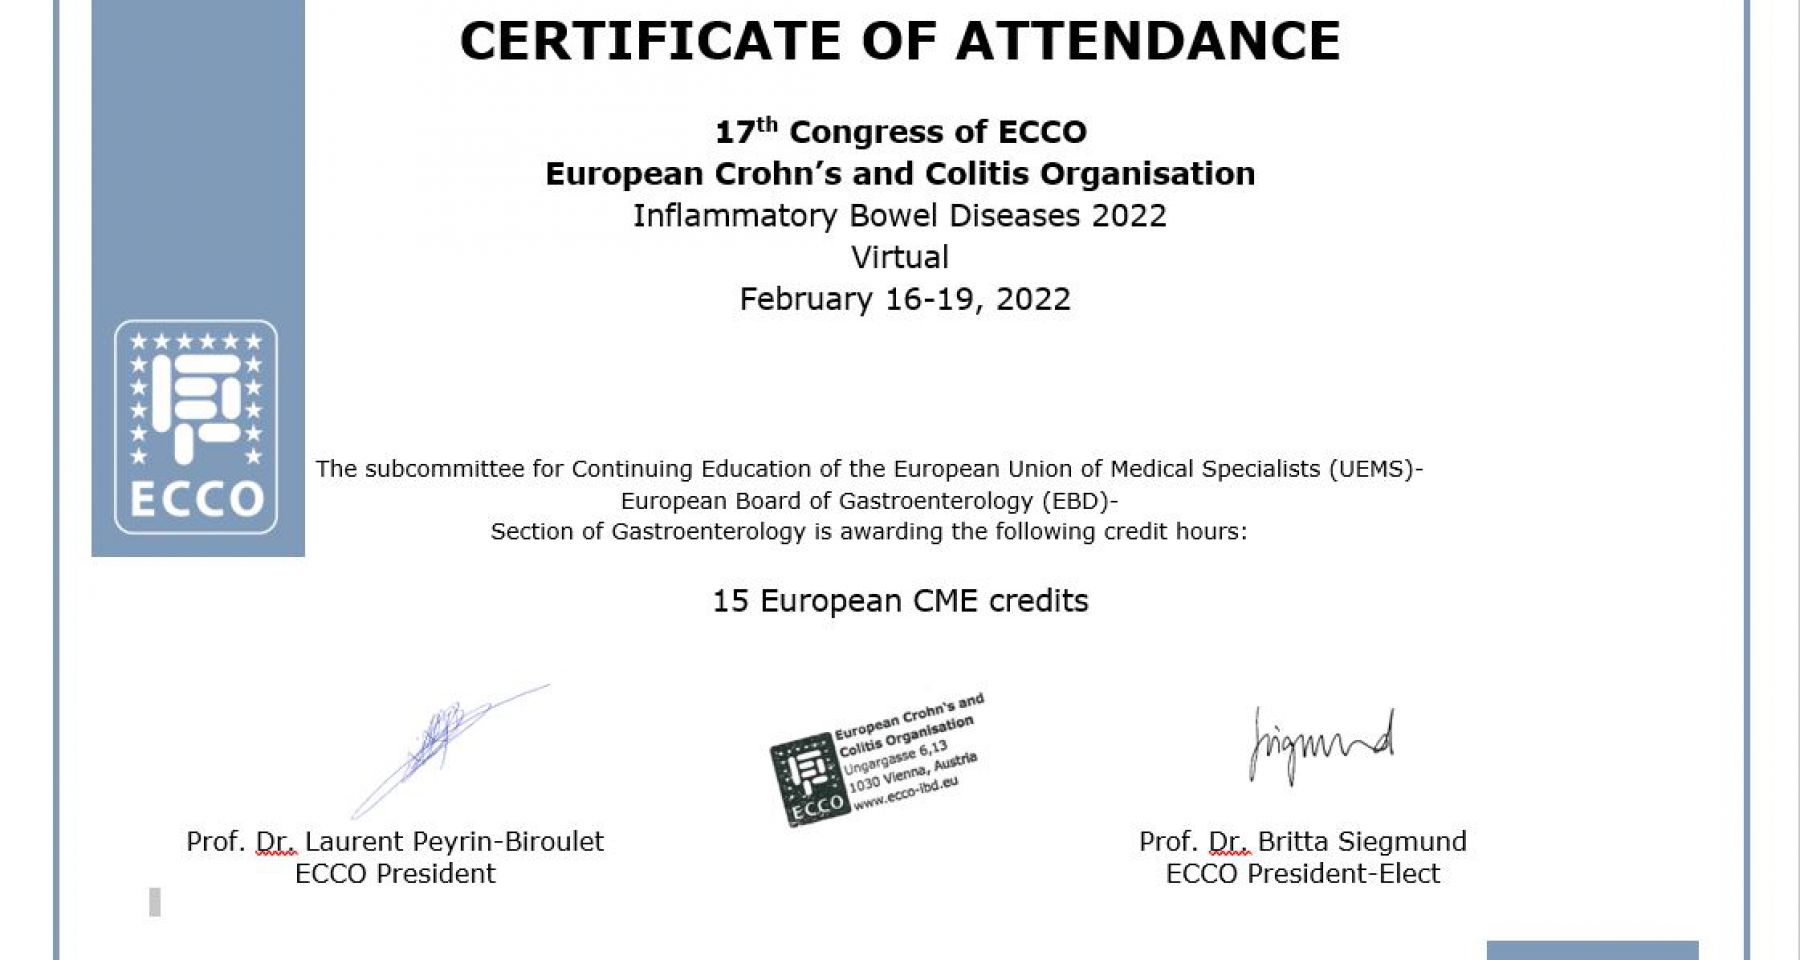 Don't forget to download your ECCO'22 Certificate of Attendance